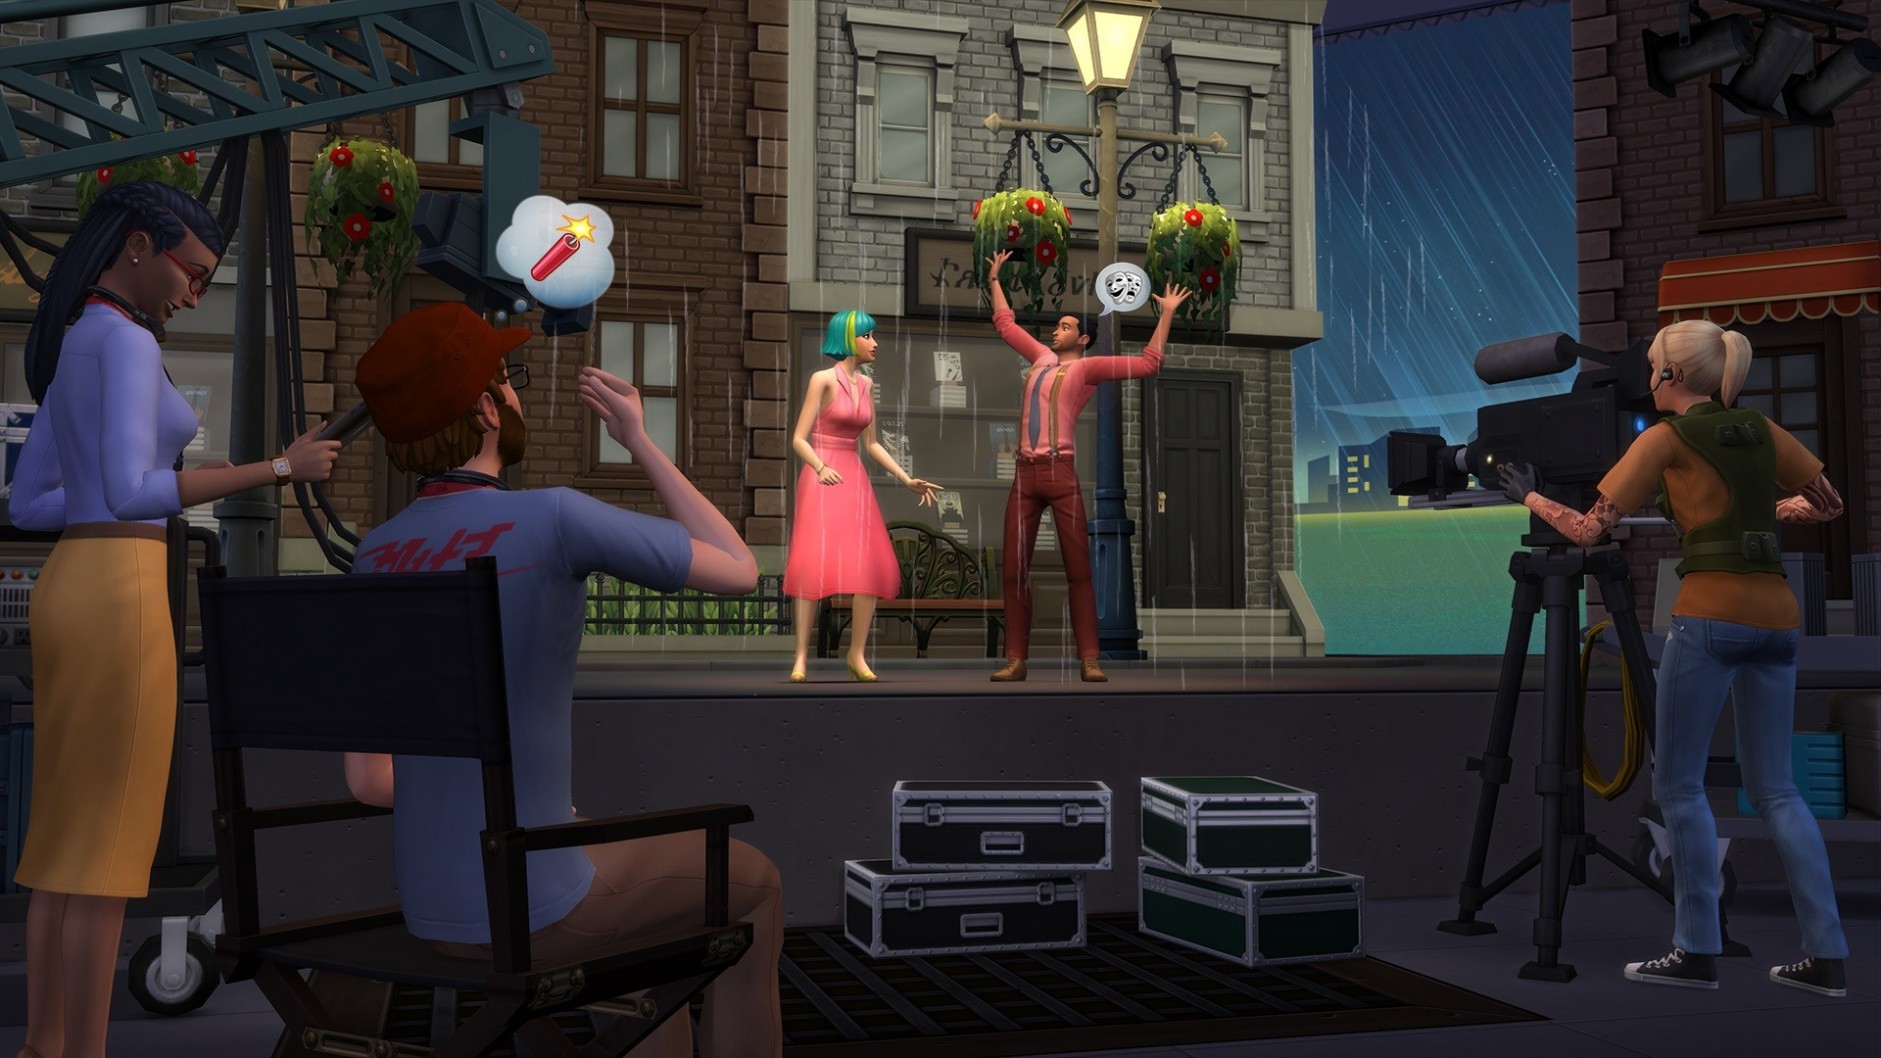 The Sims 4 Get Famous v1.47.49.1020 Free Download